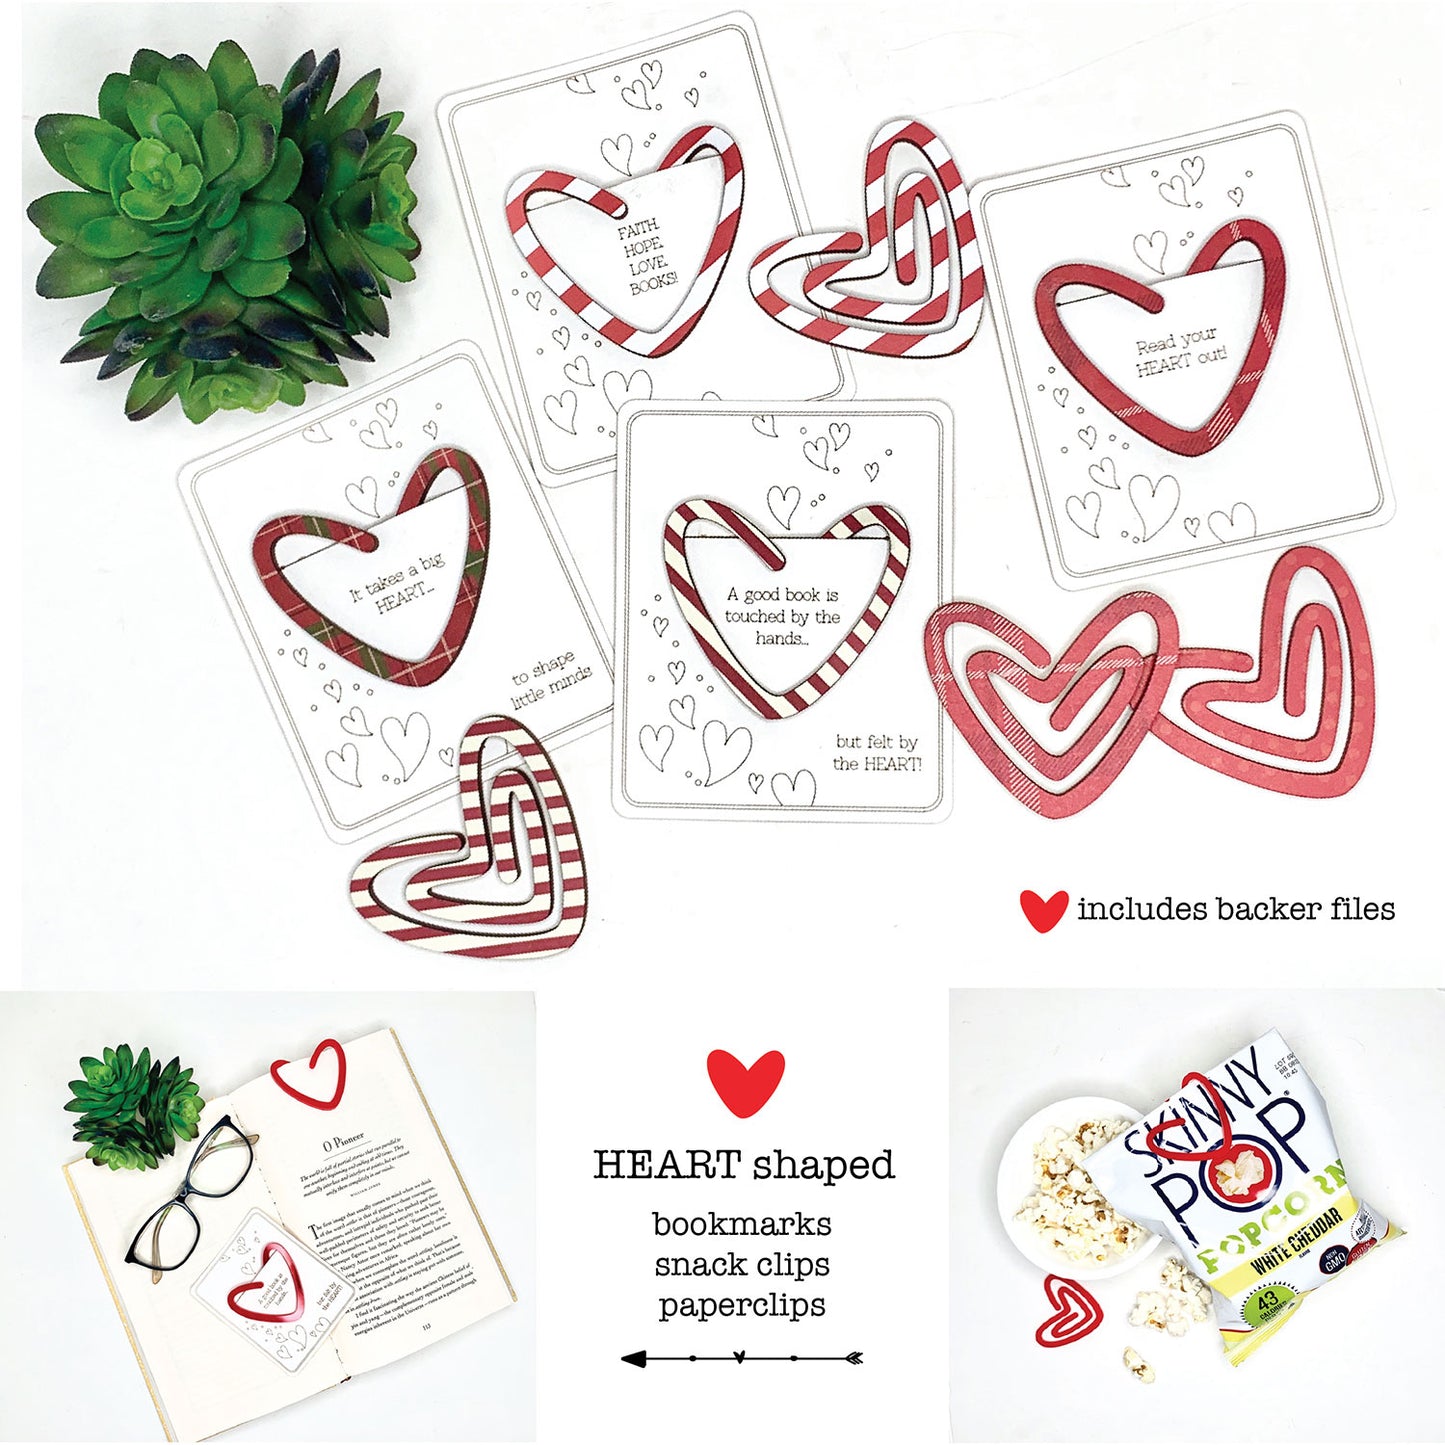 Heart-Shaped Bookmark with Card Backer - Paperclip - Snack Bag Closure